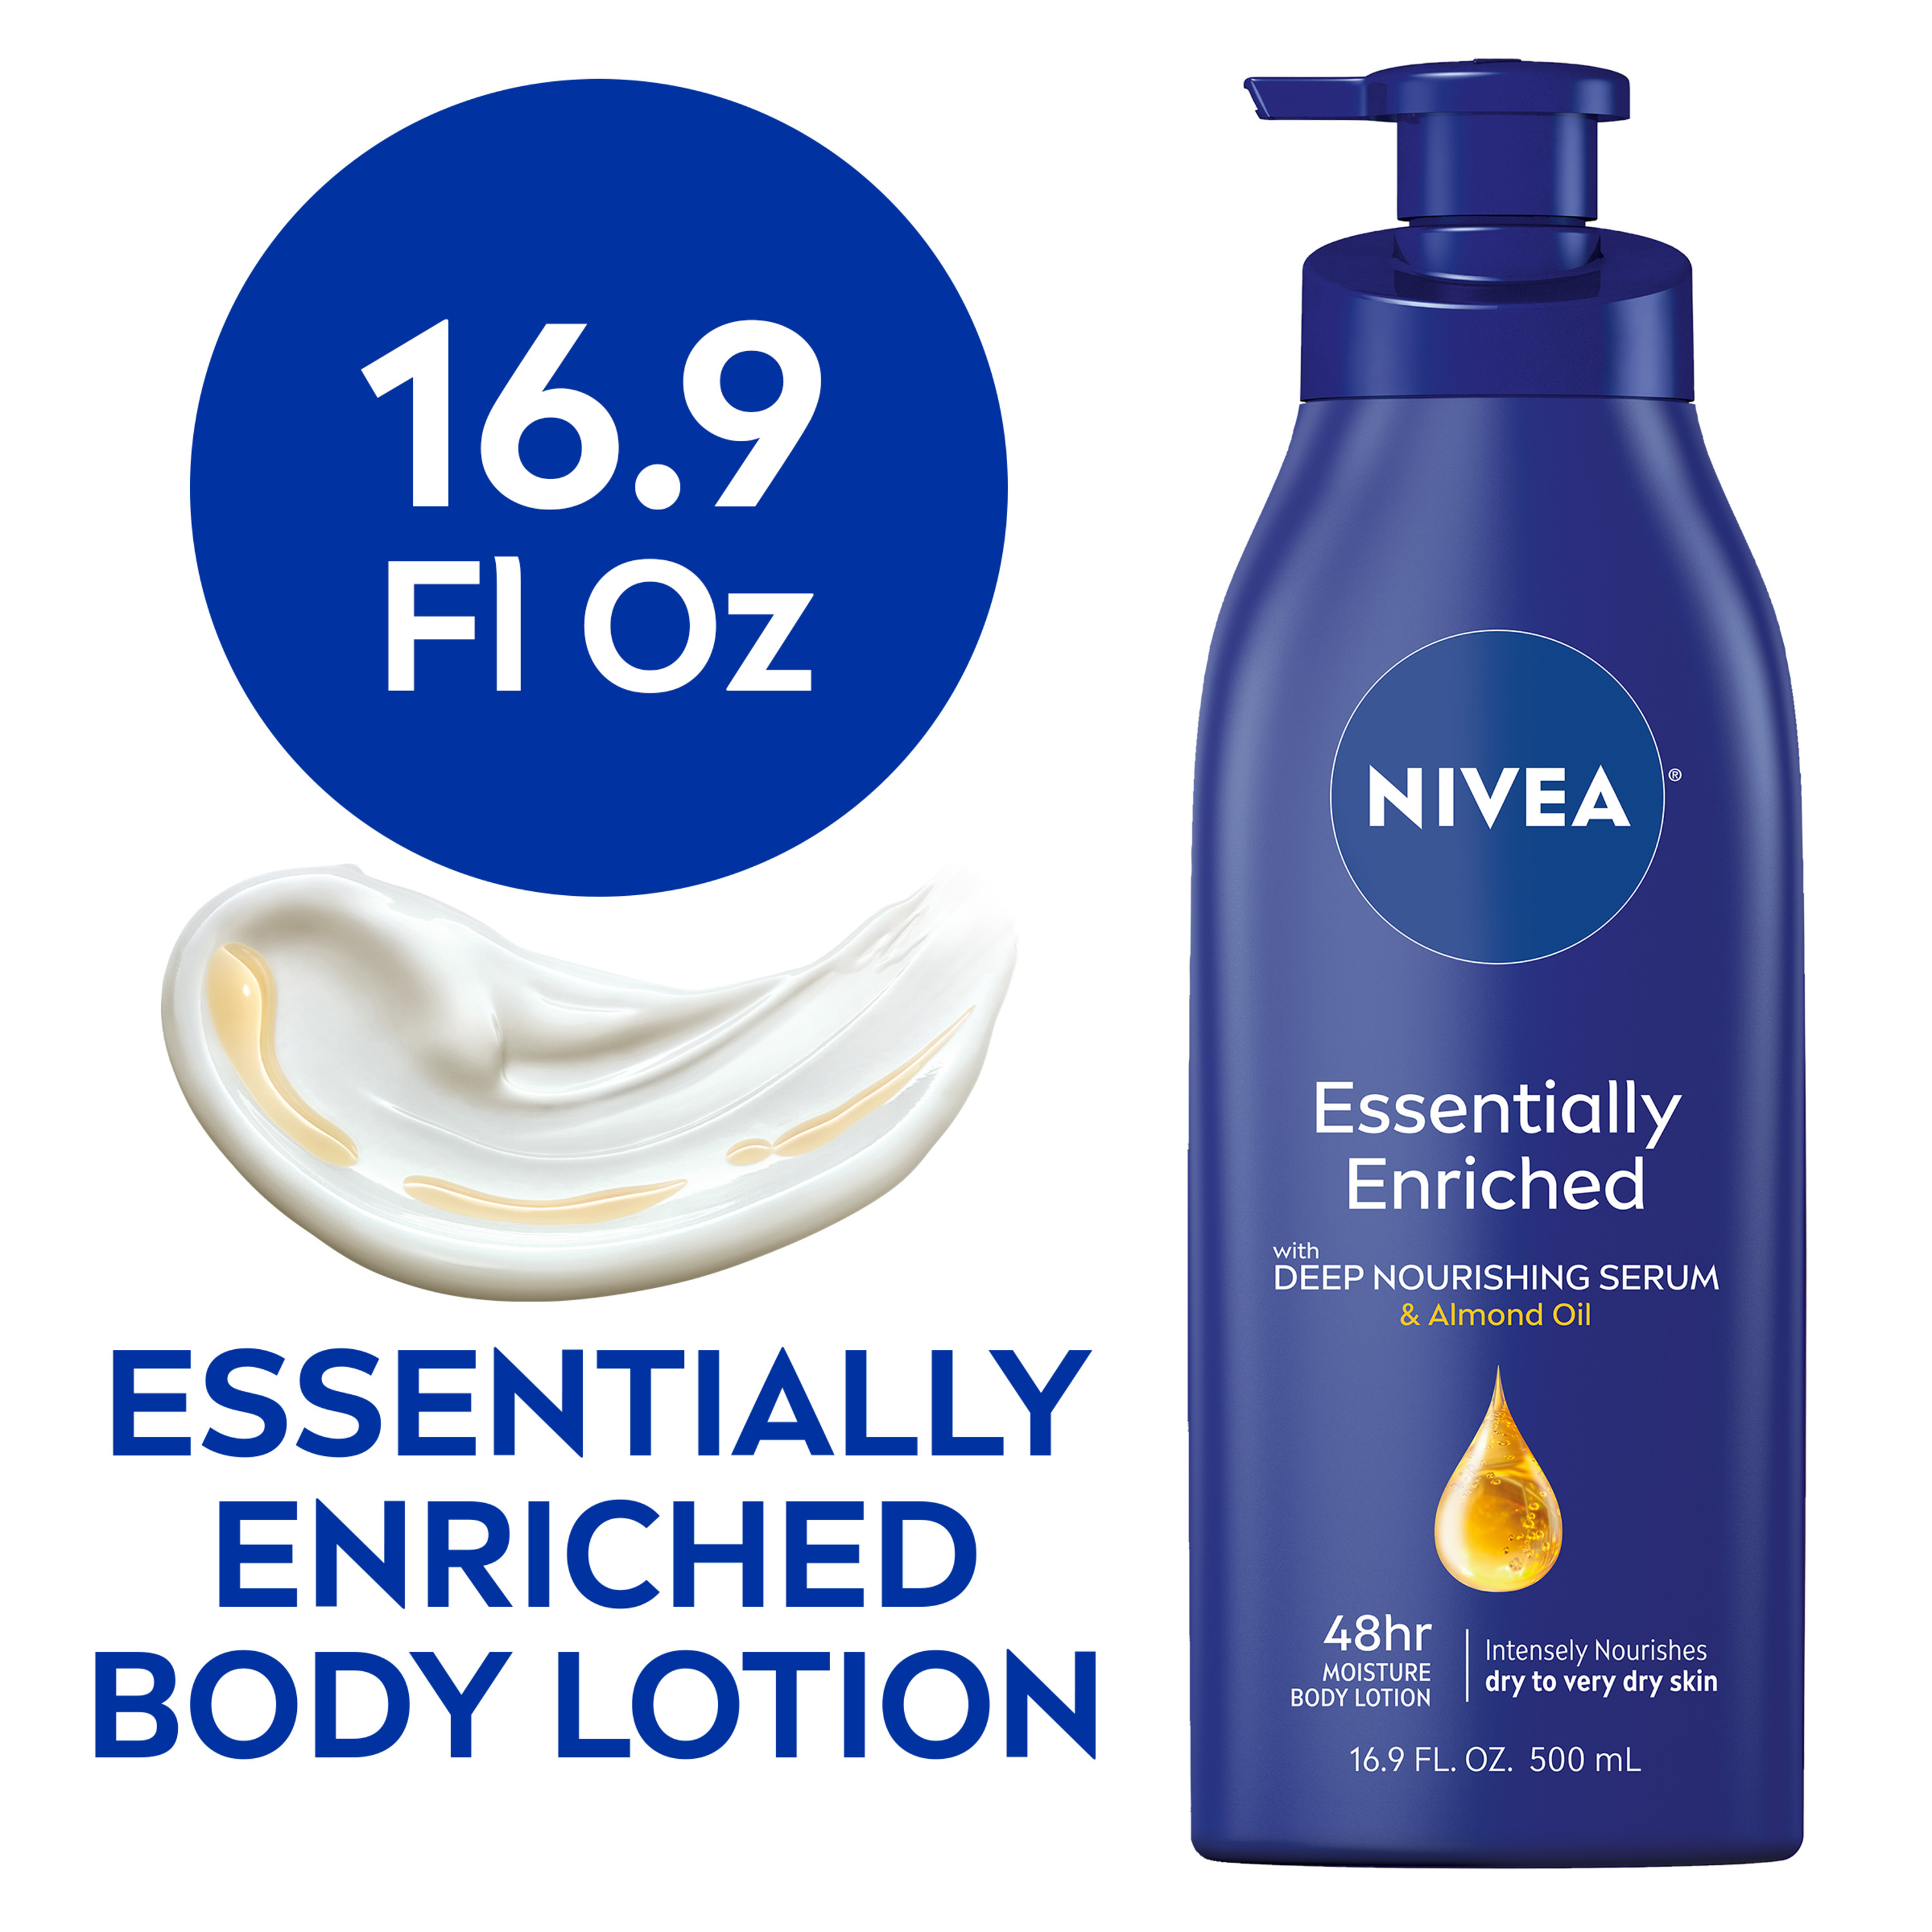 NIVEA Essentially Enriched Body Lotion for Dry Skin, 16.9 Fl Oz Pump Bottle - image 1 of 13